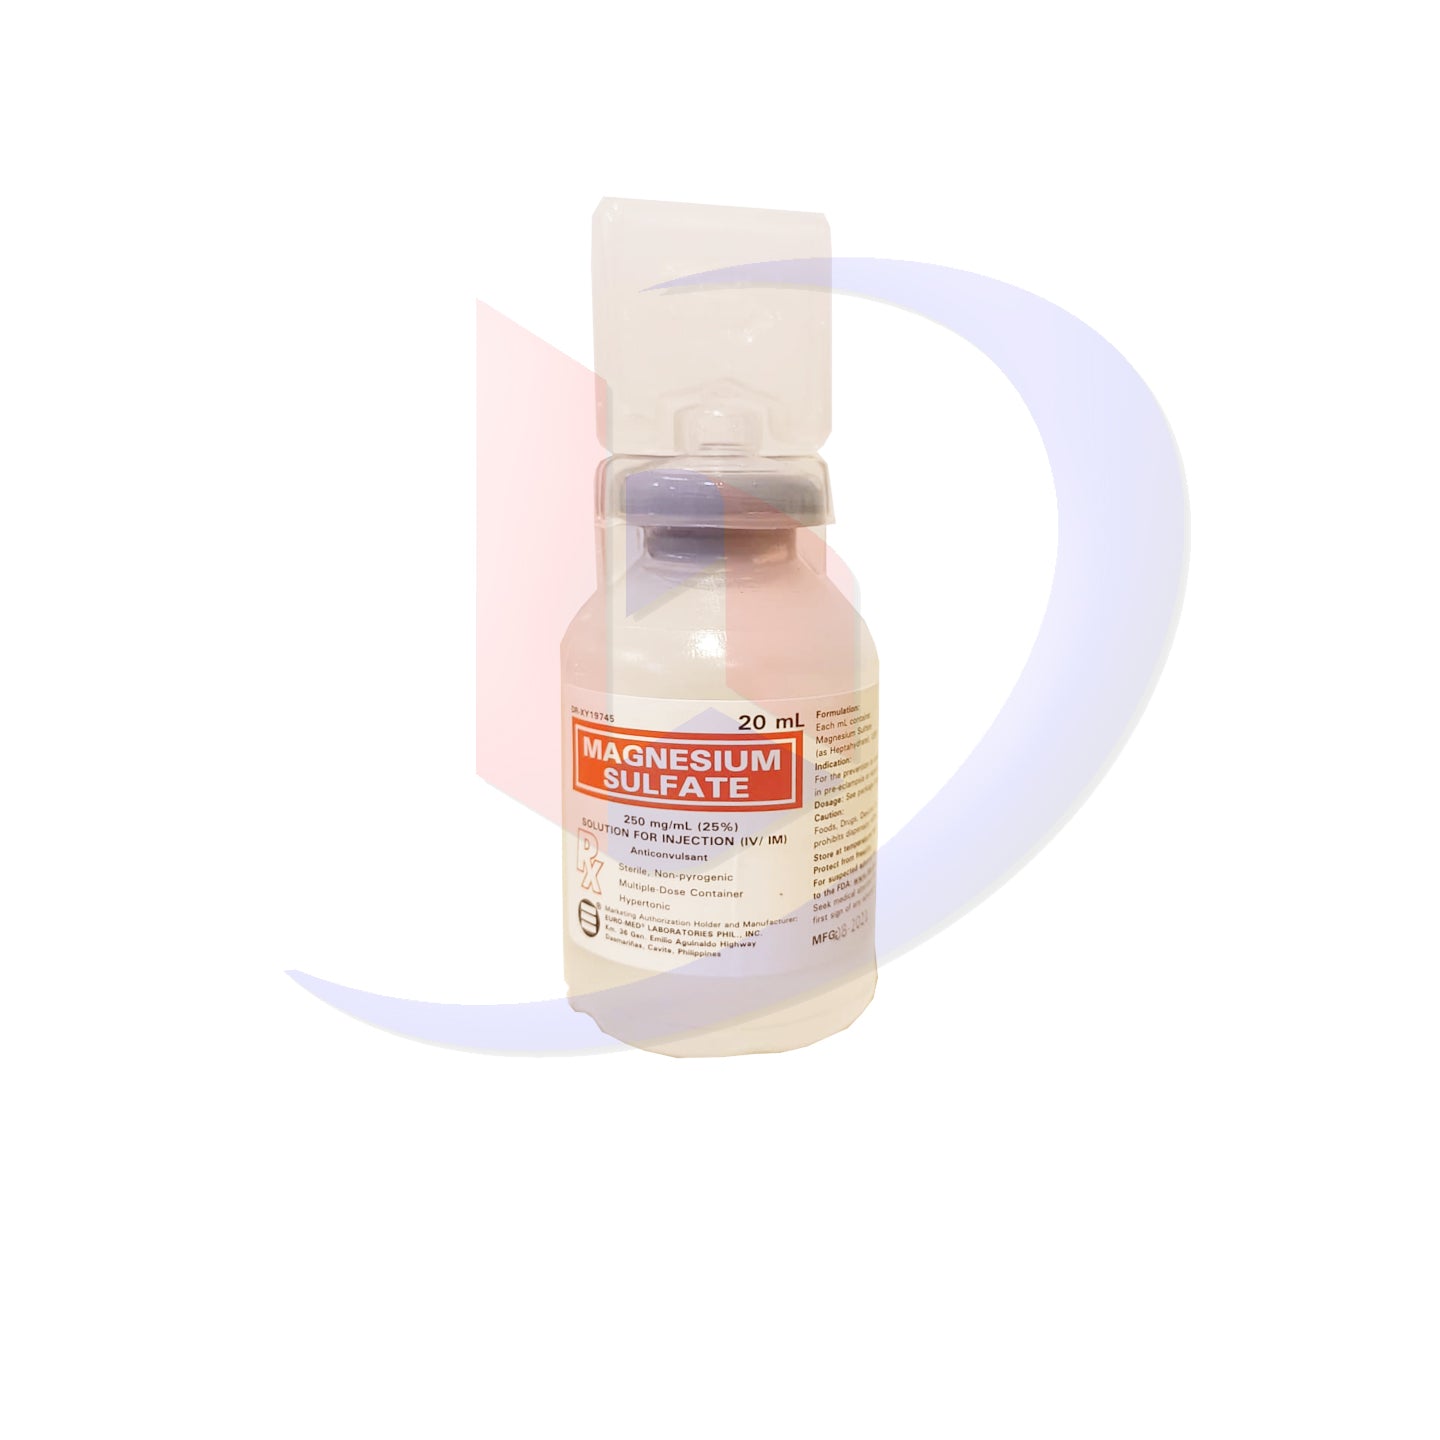 Magnesium Sulfate 250mg/ml (25%) Solution for Injection I.M/I.V 1's